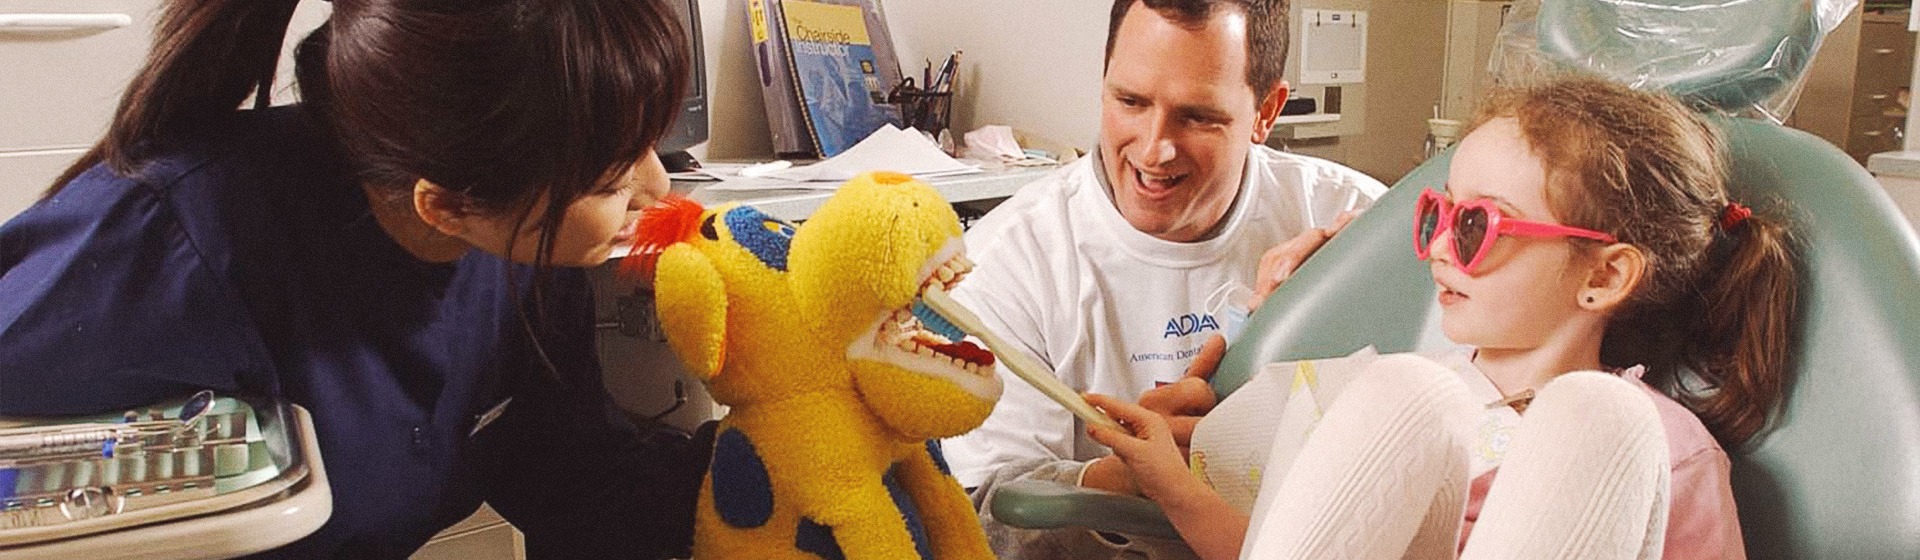 Smart Way to Teach Oral Hygiene to Your Children Patients Through Dental Puppets for Dentist Offices?